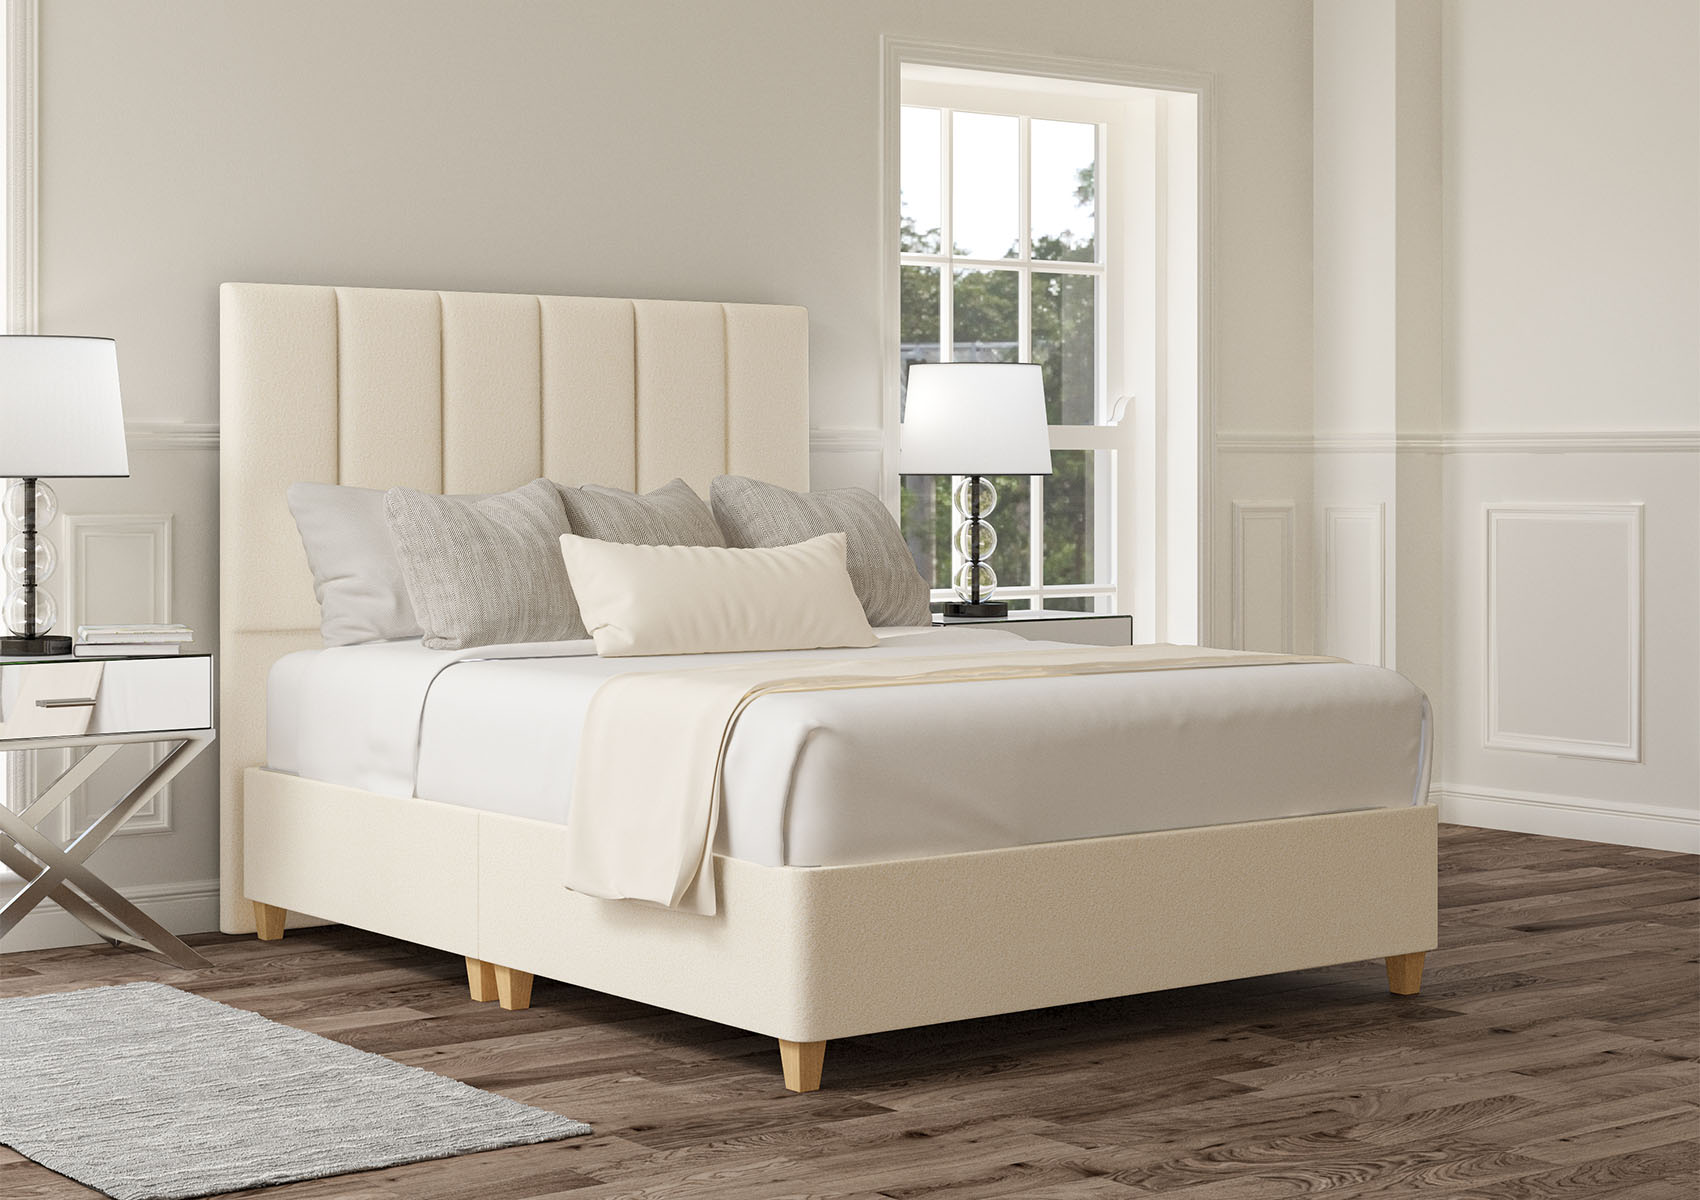 View Empire Heritage Mink Upholstered King Size Divan Bed Time4Sleep information